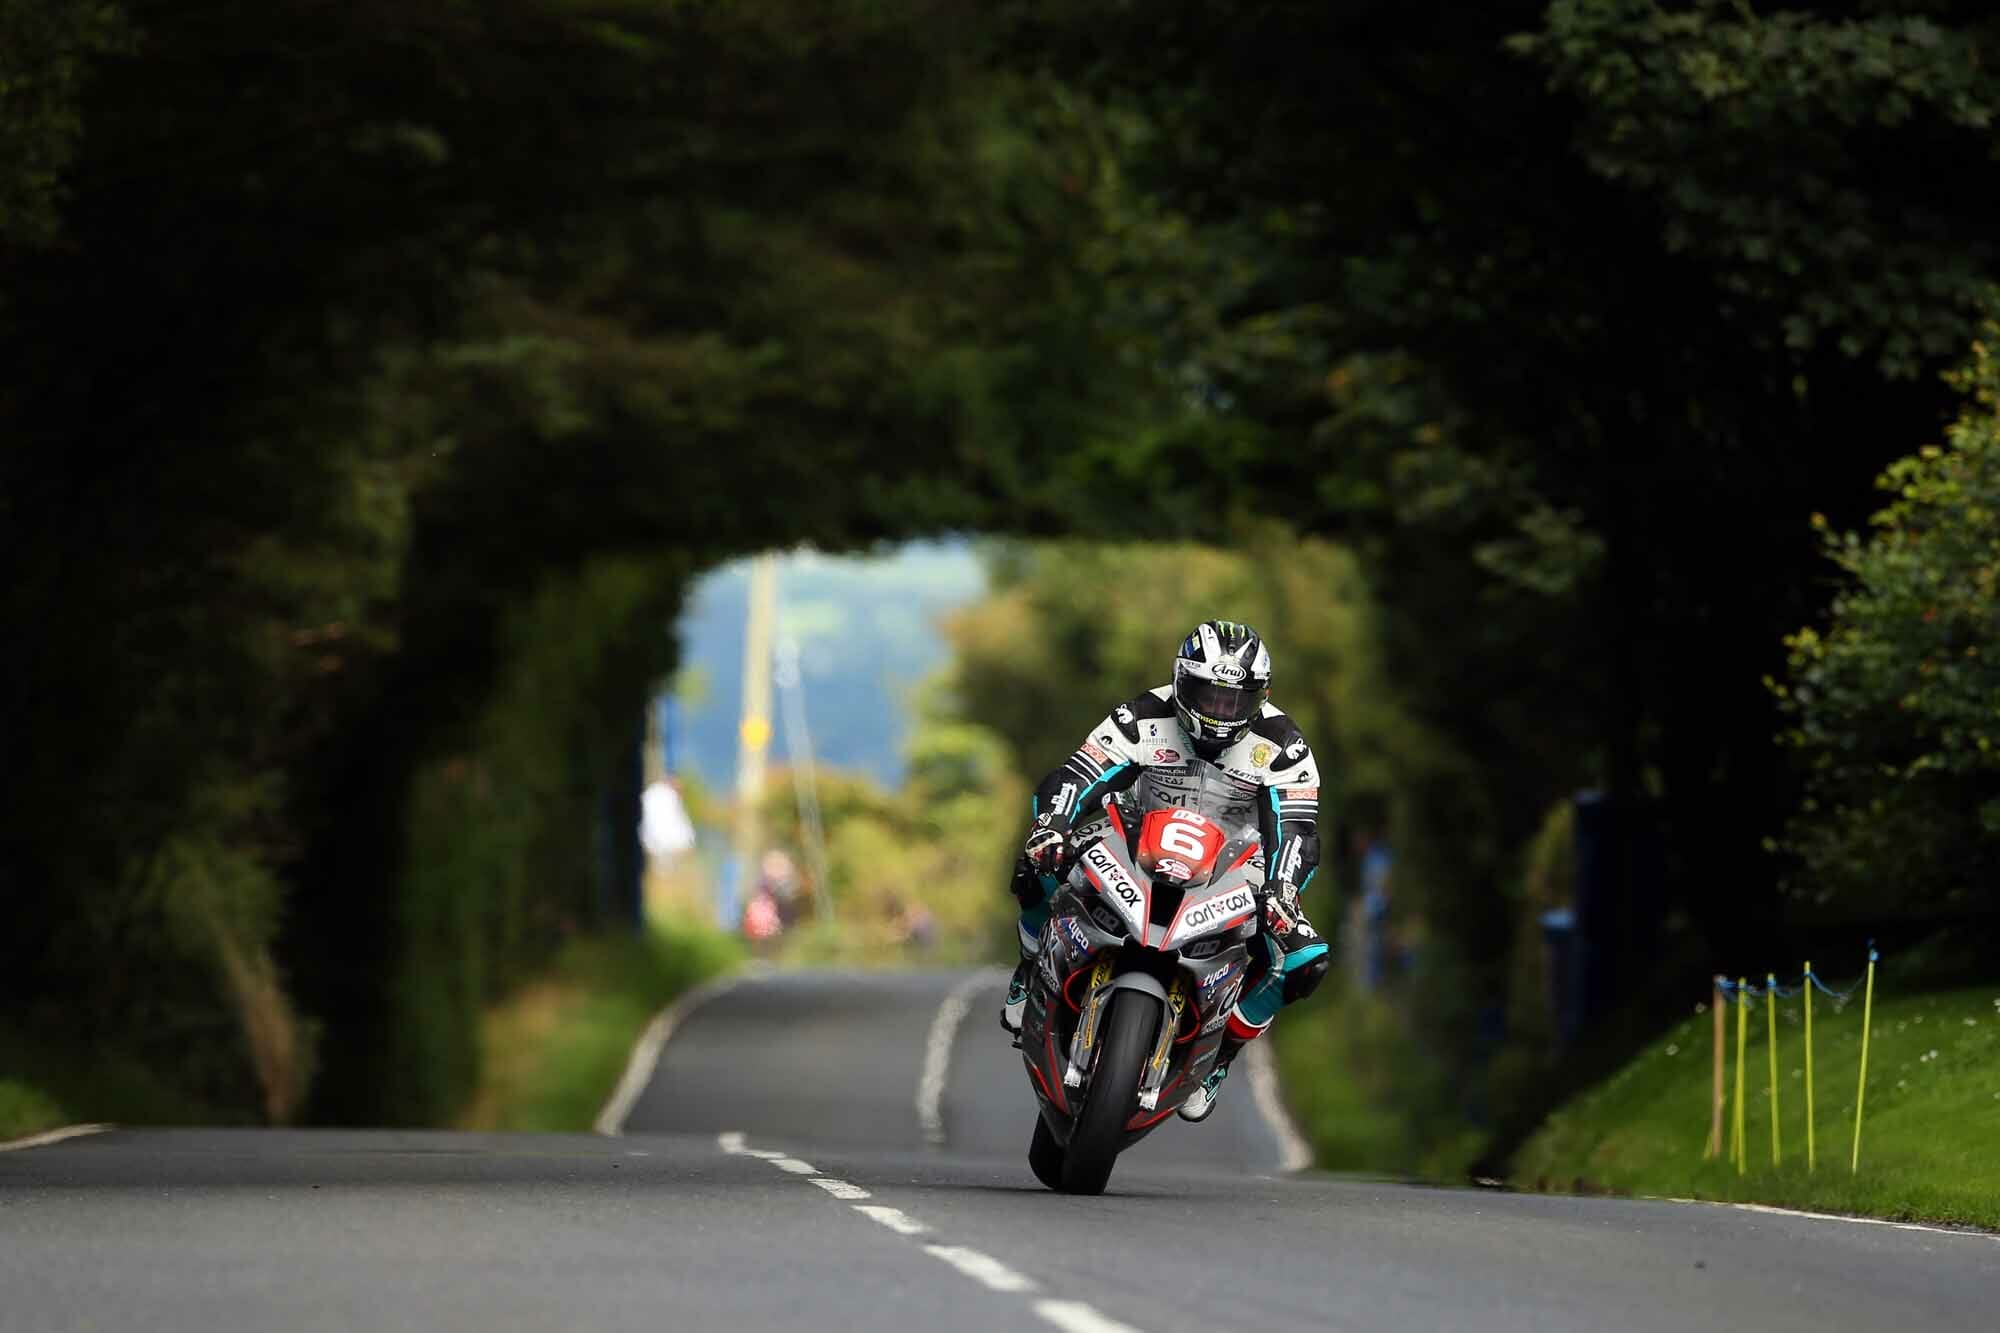 Ulster Grand Prix 2022 cancelled
- also in the MOTORCYCLES.NEWS APP